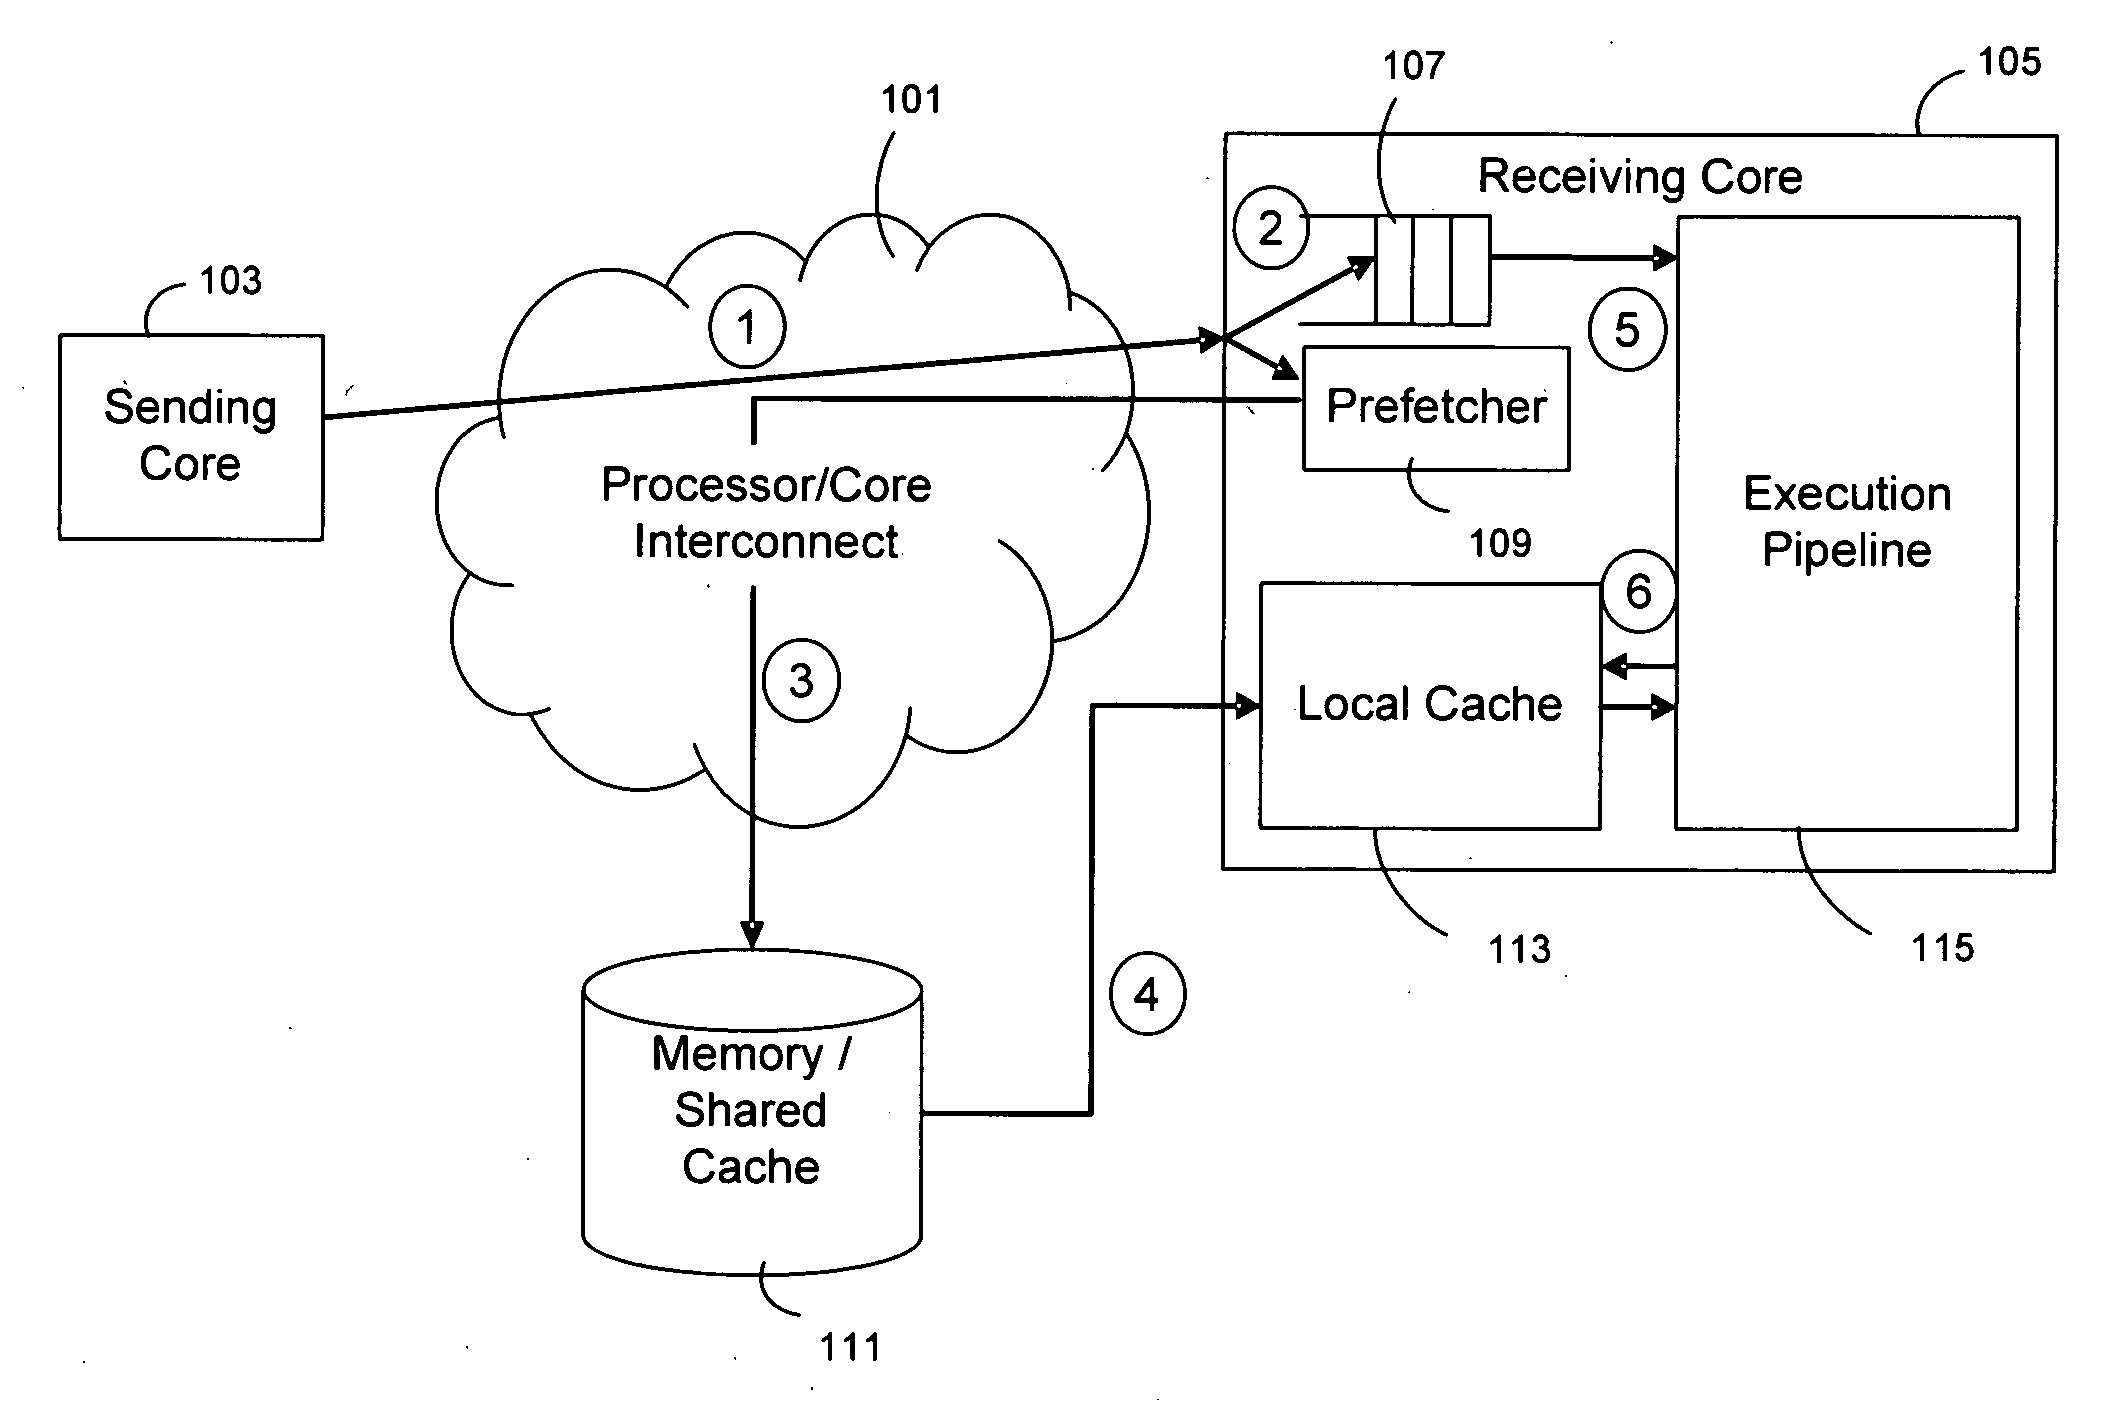 Method and apparatus for speculative prefetching in a multi-processor/multi-core message-passing machine